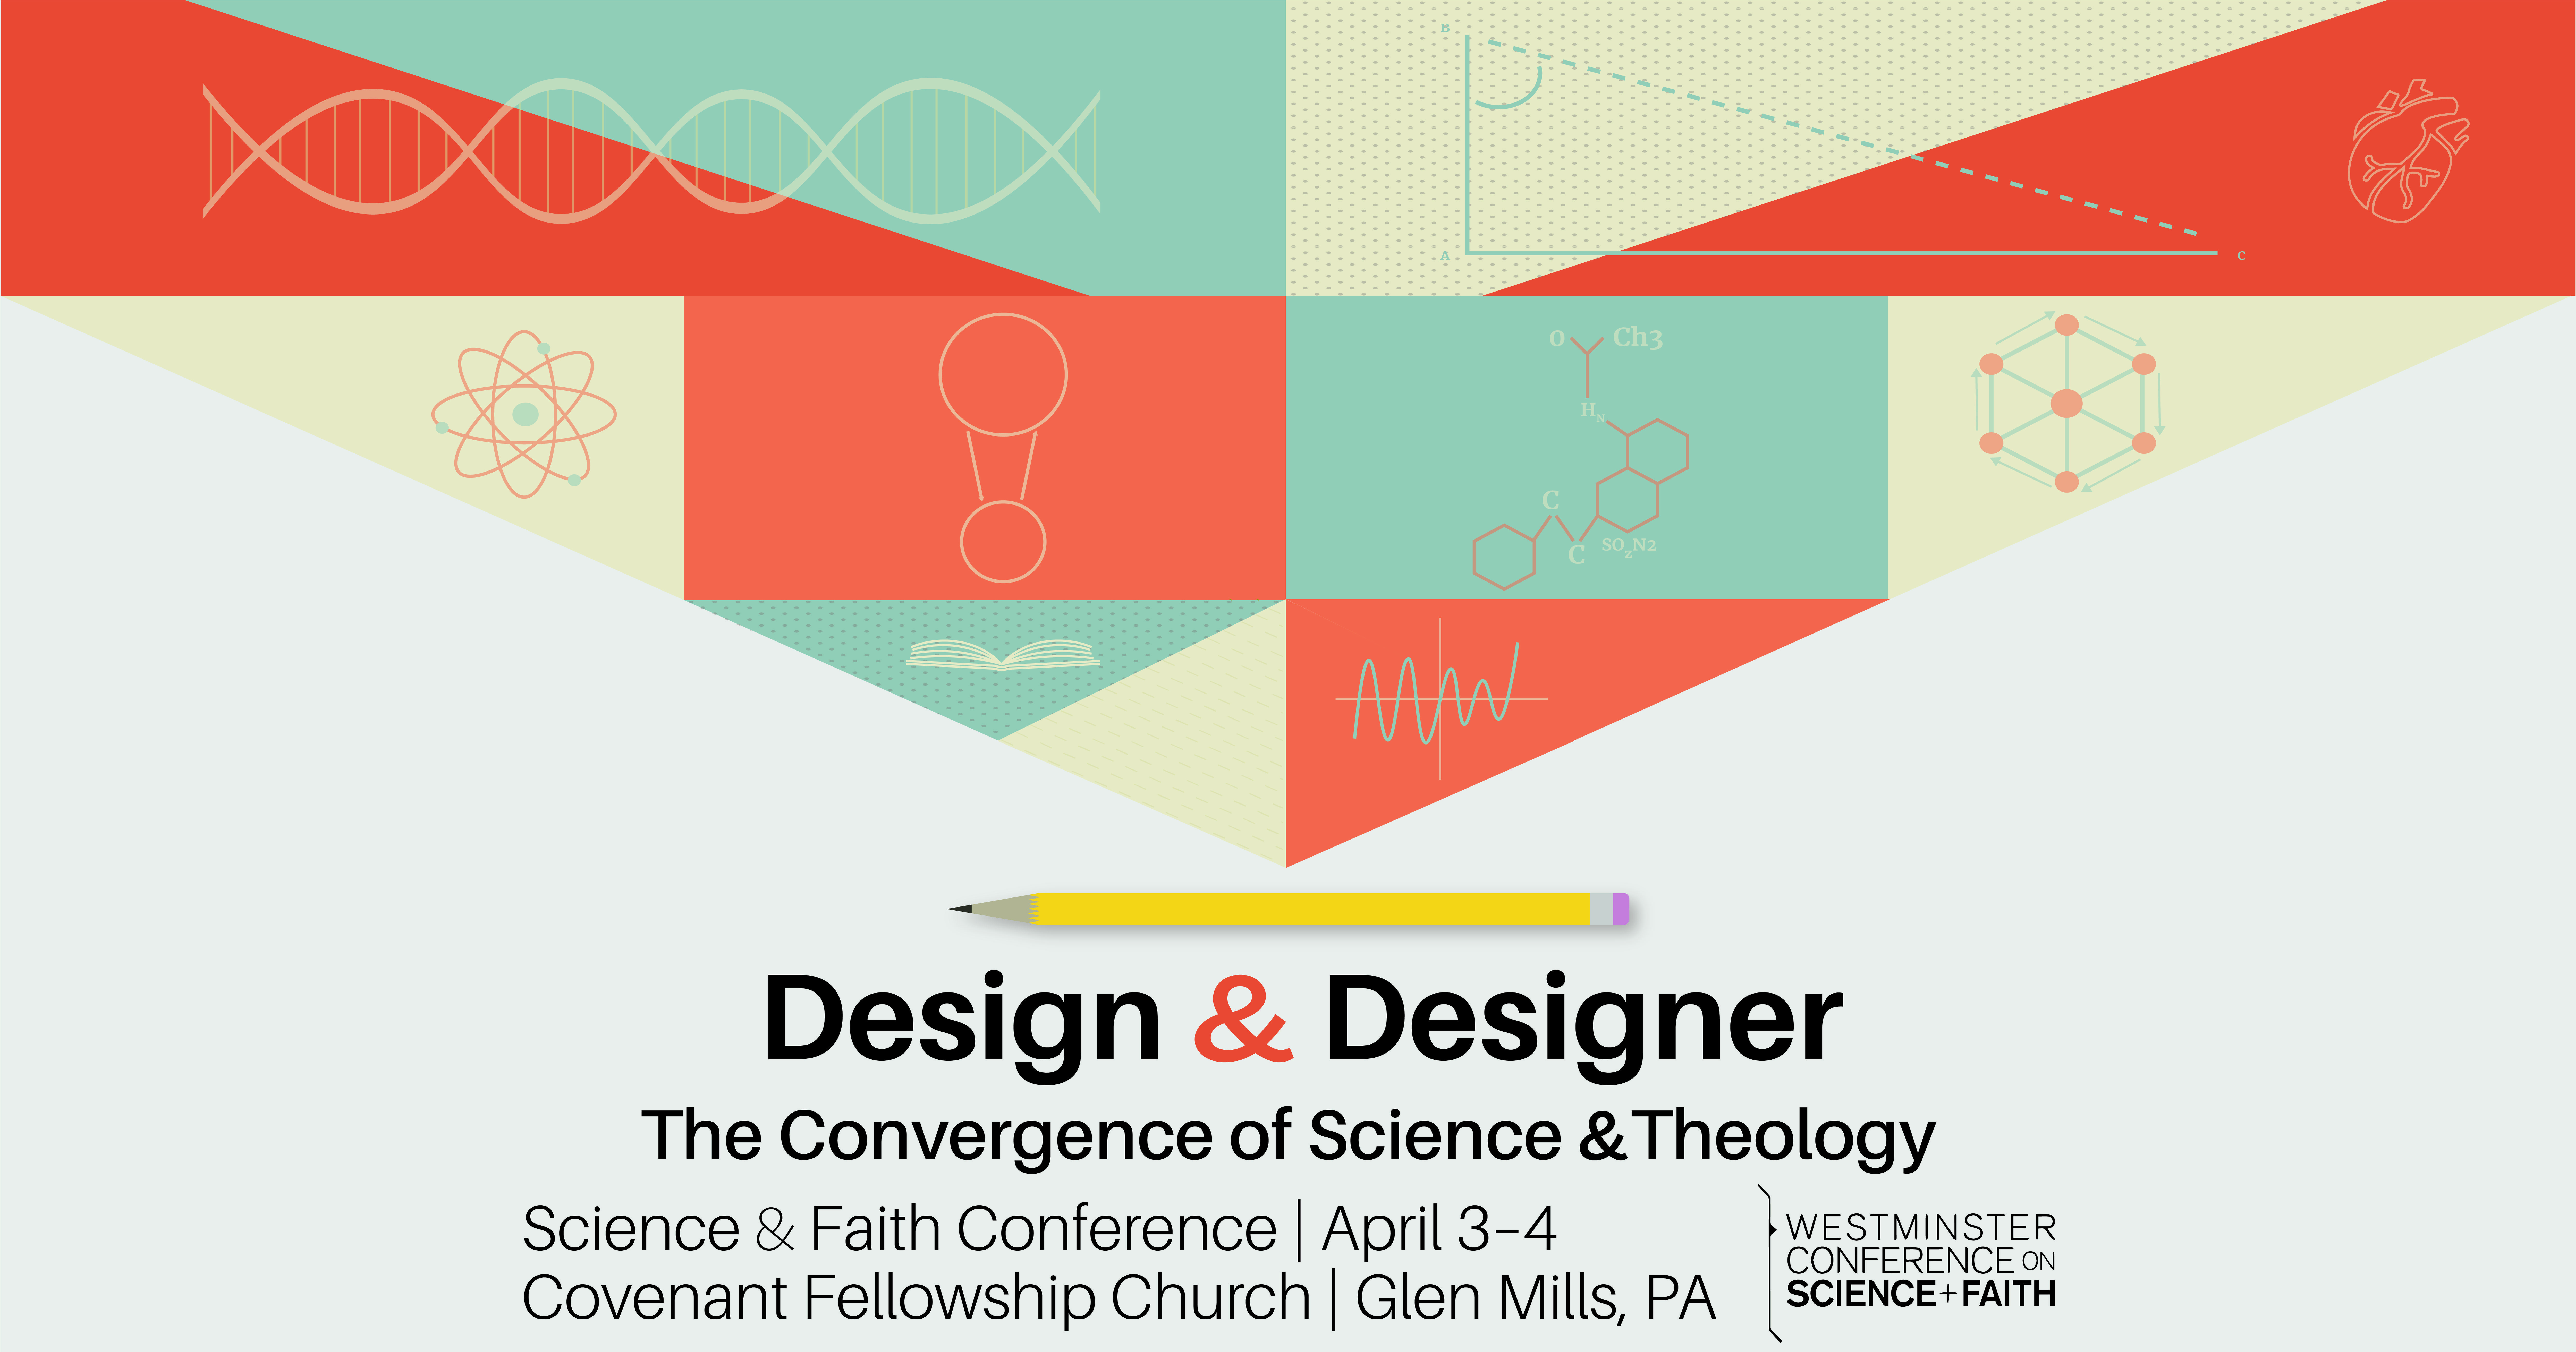 Design & Designer: The Convergence of Science & Theology